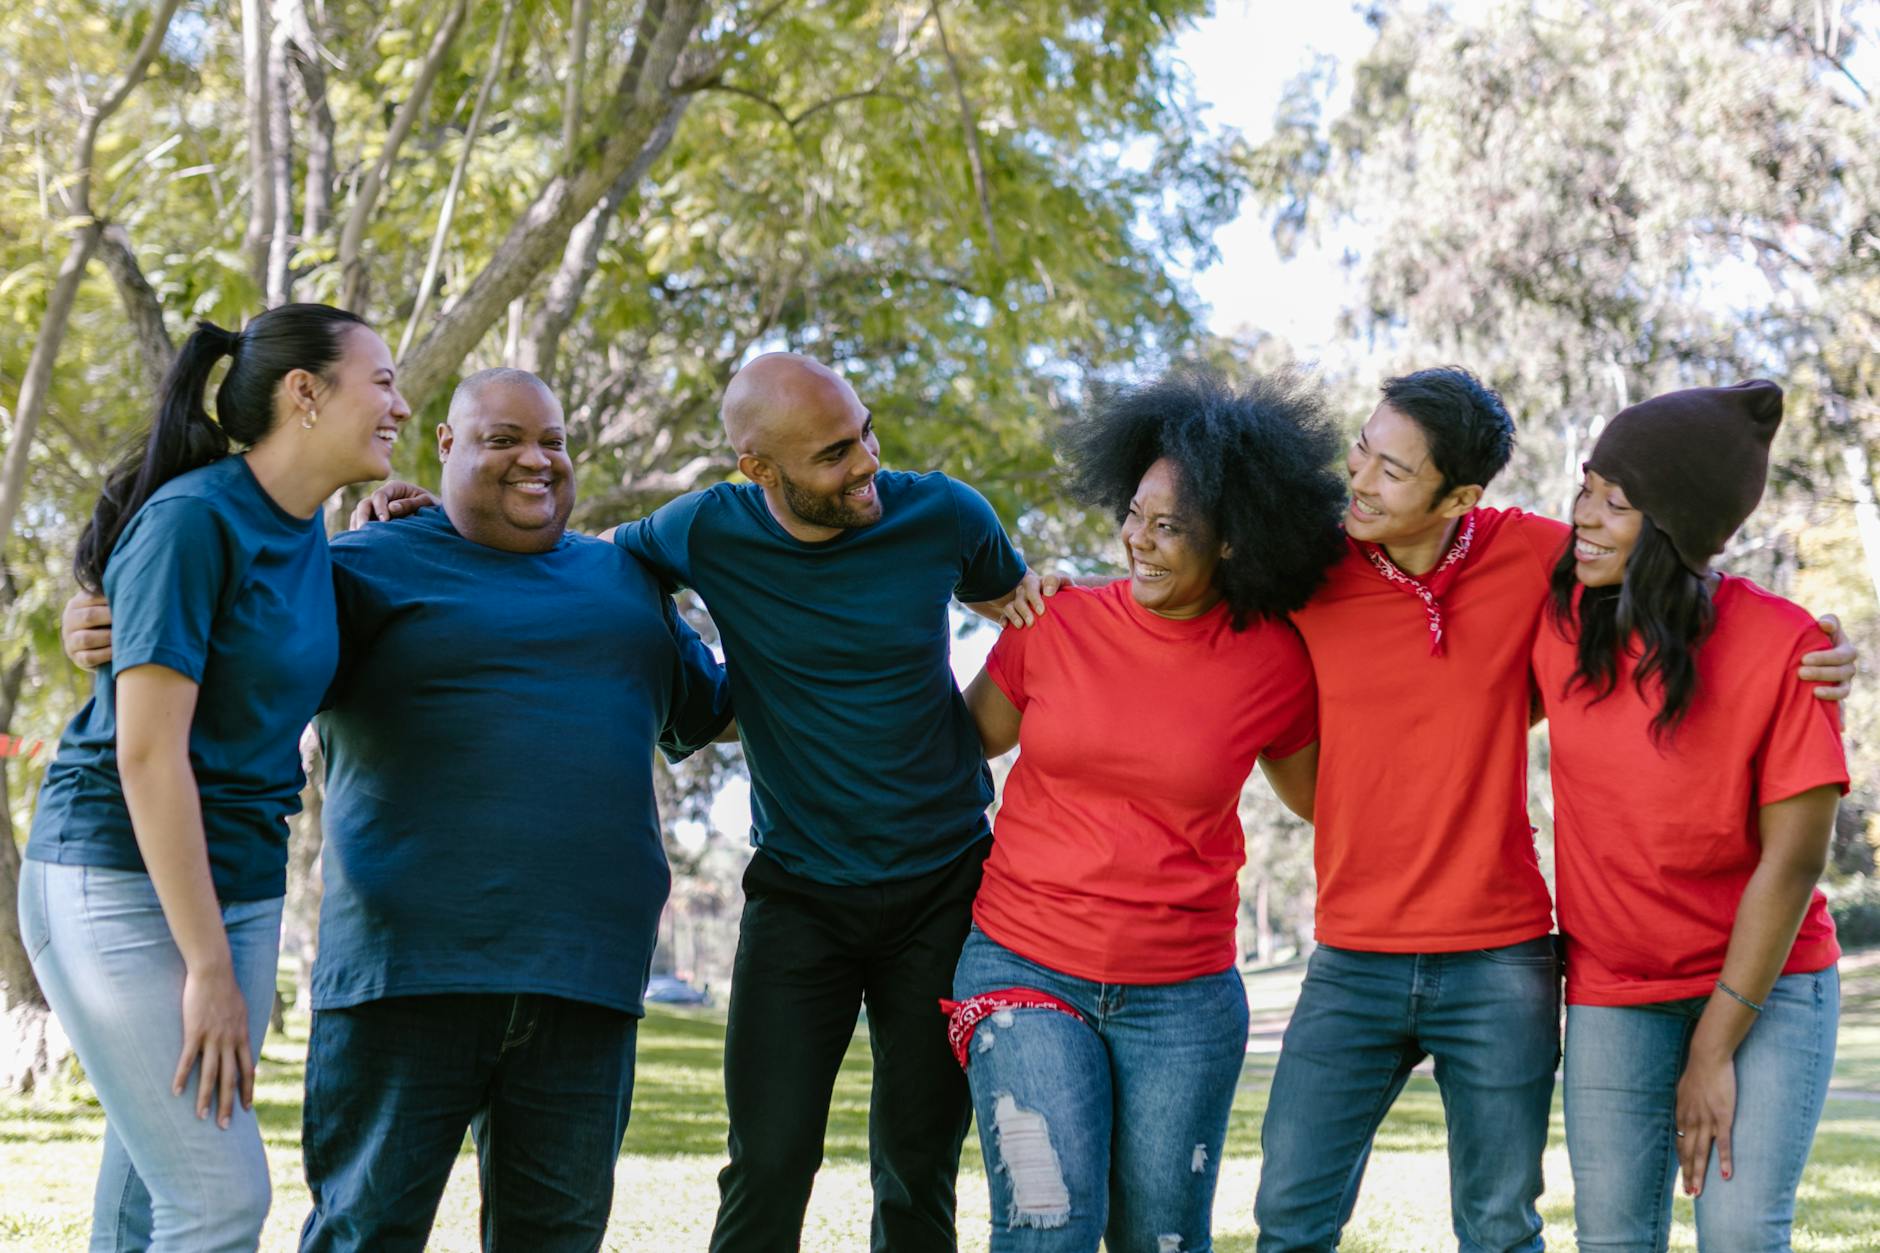 Group of People Wearing Blue and Red Shirts